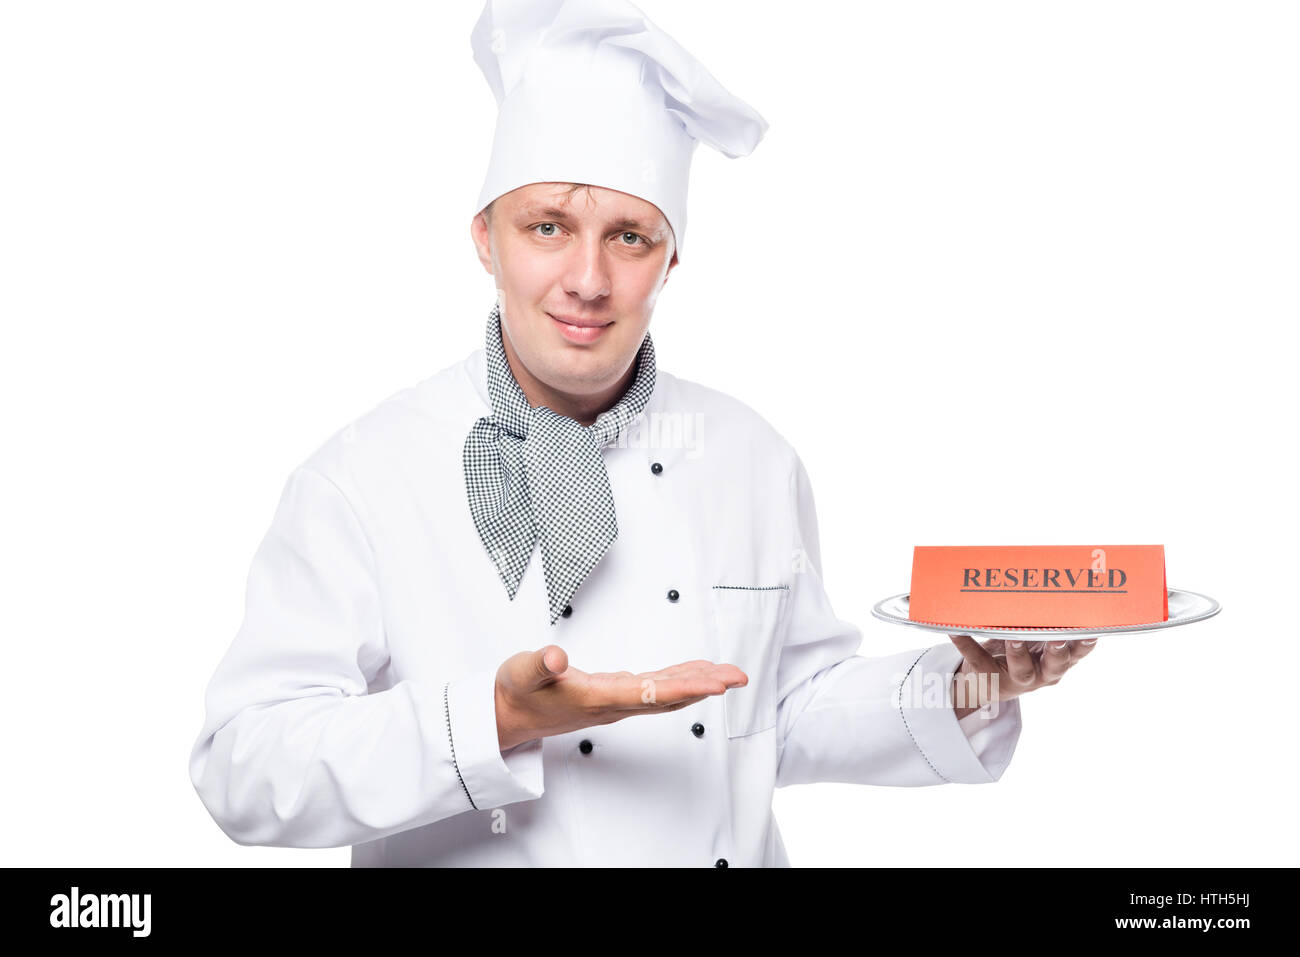 pretty professional cook with a tray on which there is a reserve ad Stock Photo